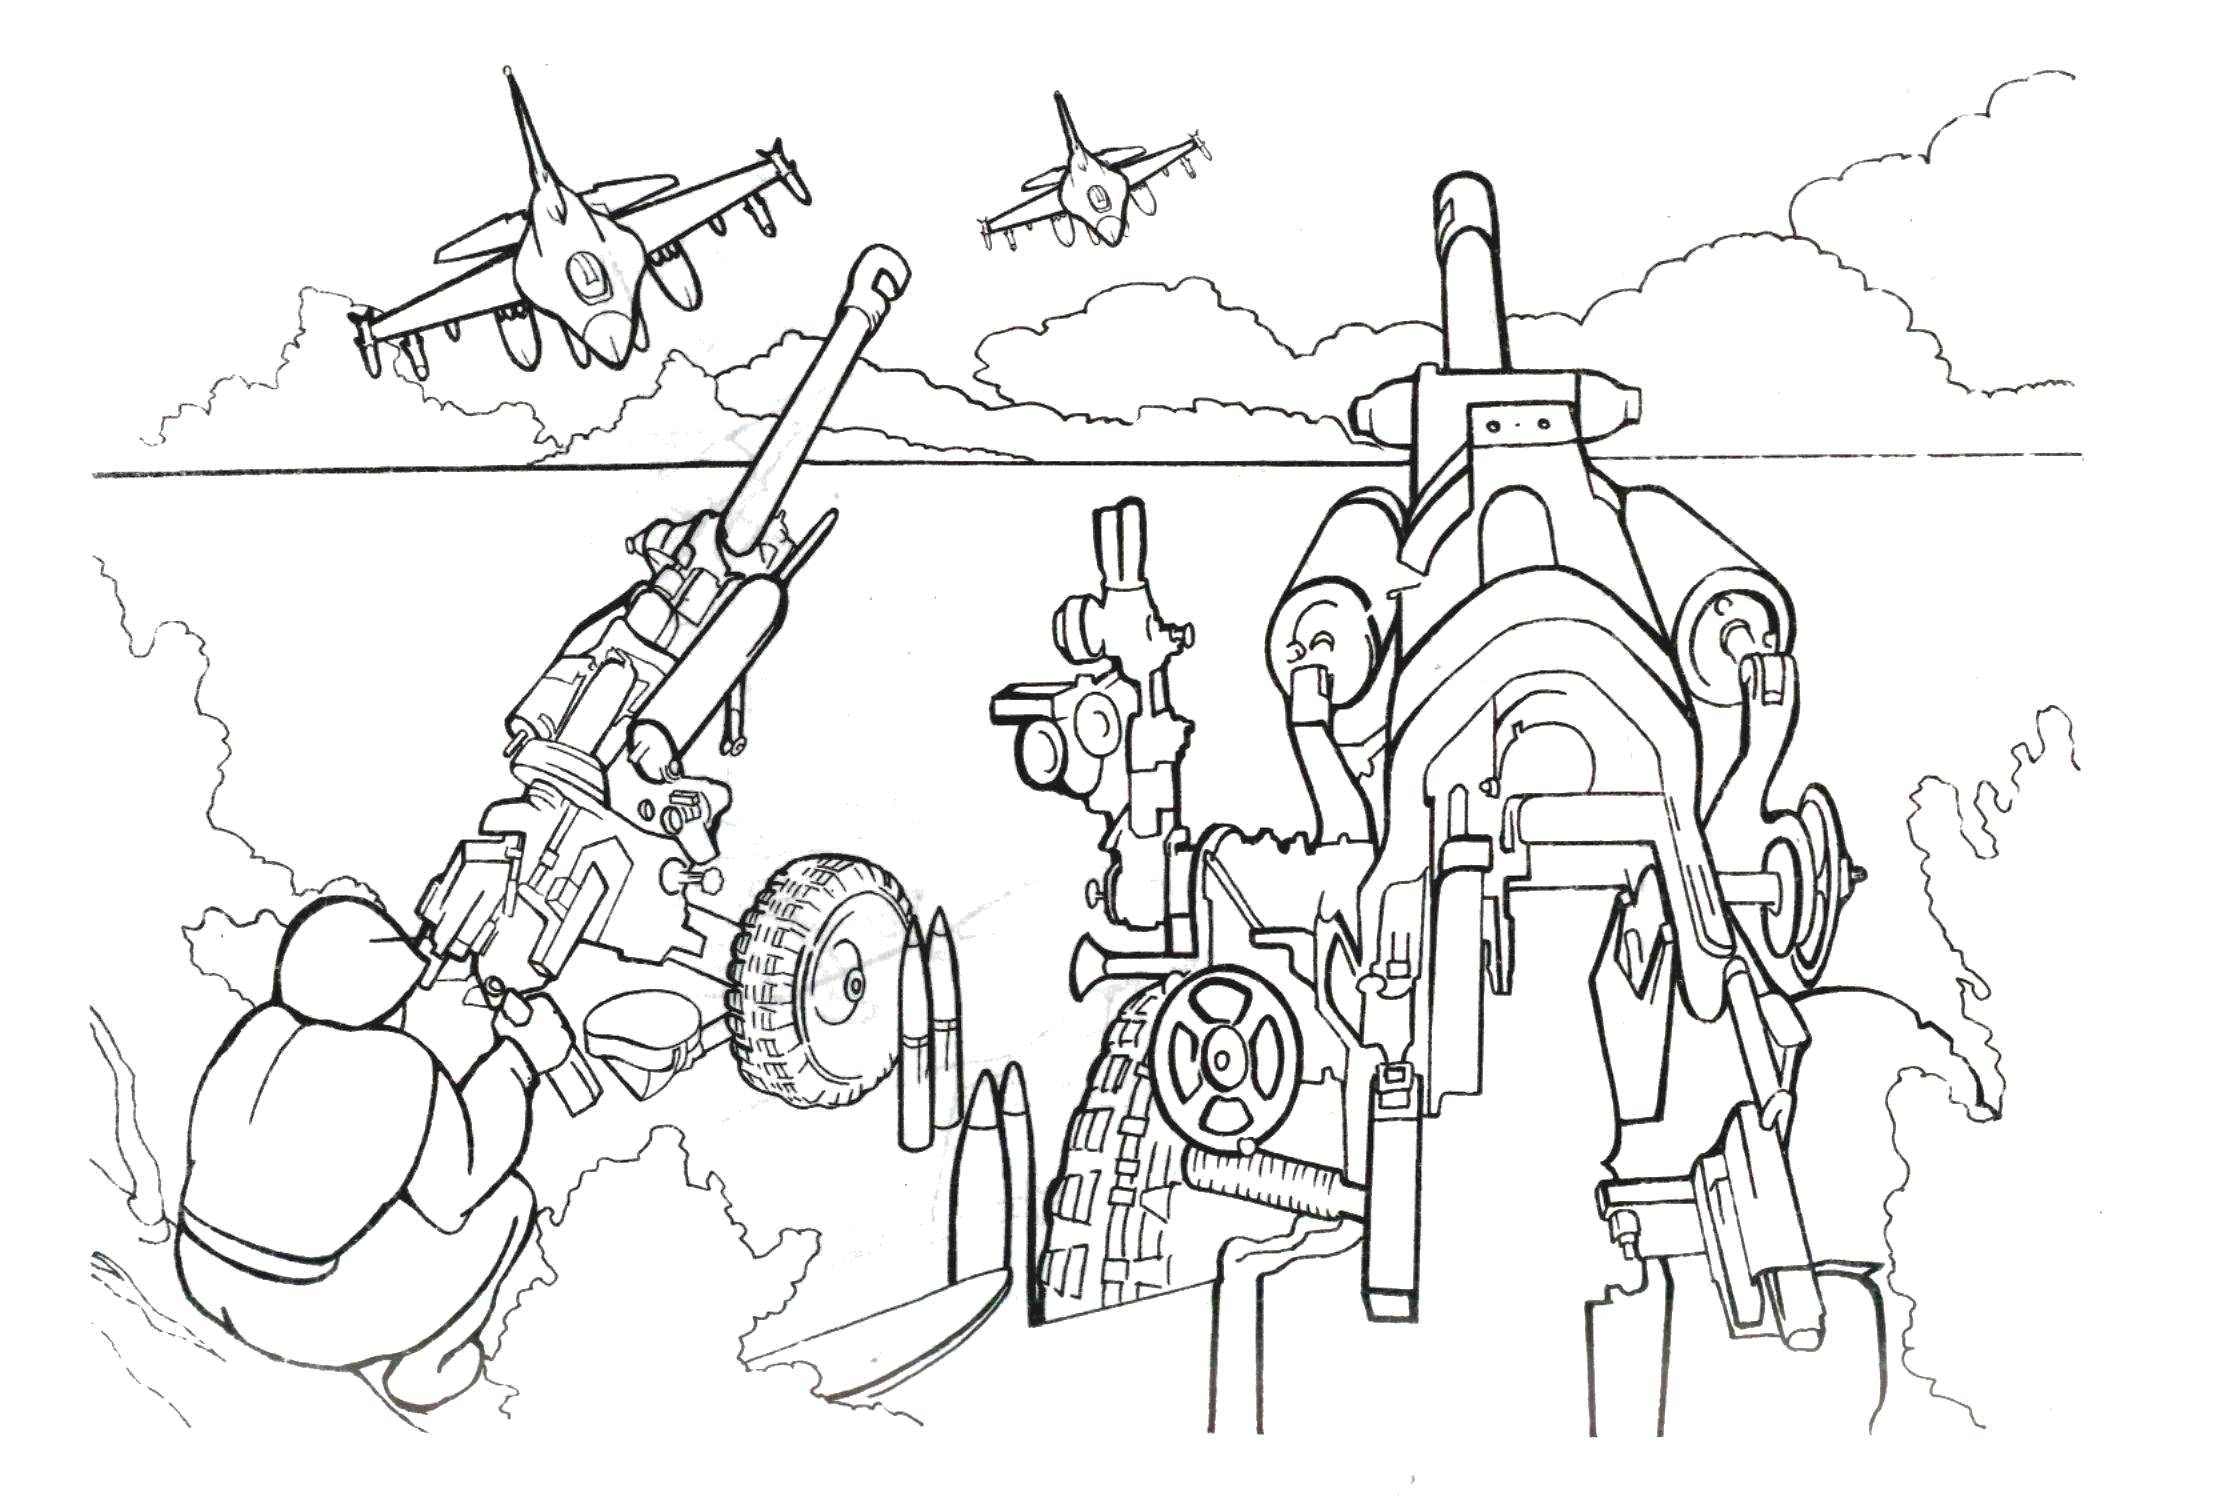 Coloring Soldiers shelled military aircraft. Category military coloring pages. Tags:  Military, special forces, soldiers, weapons, airplanes.